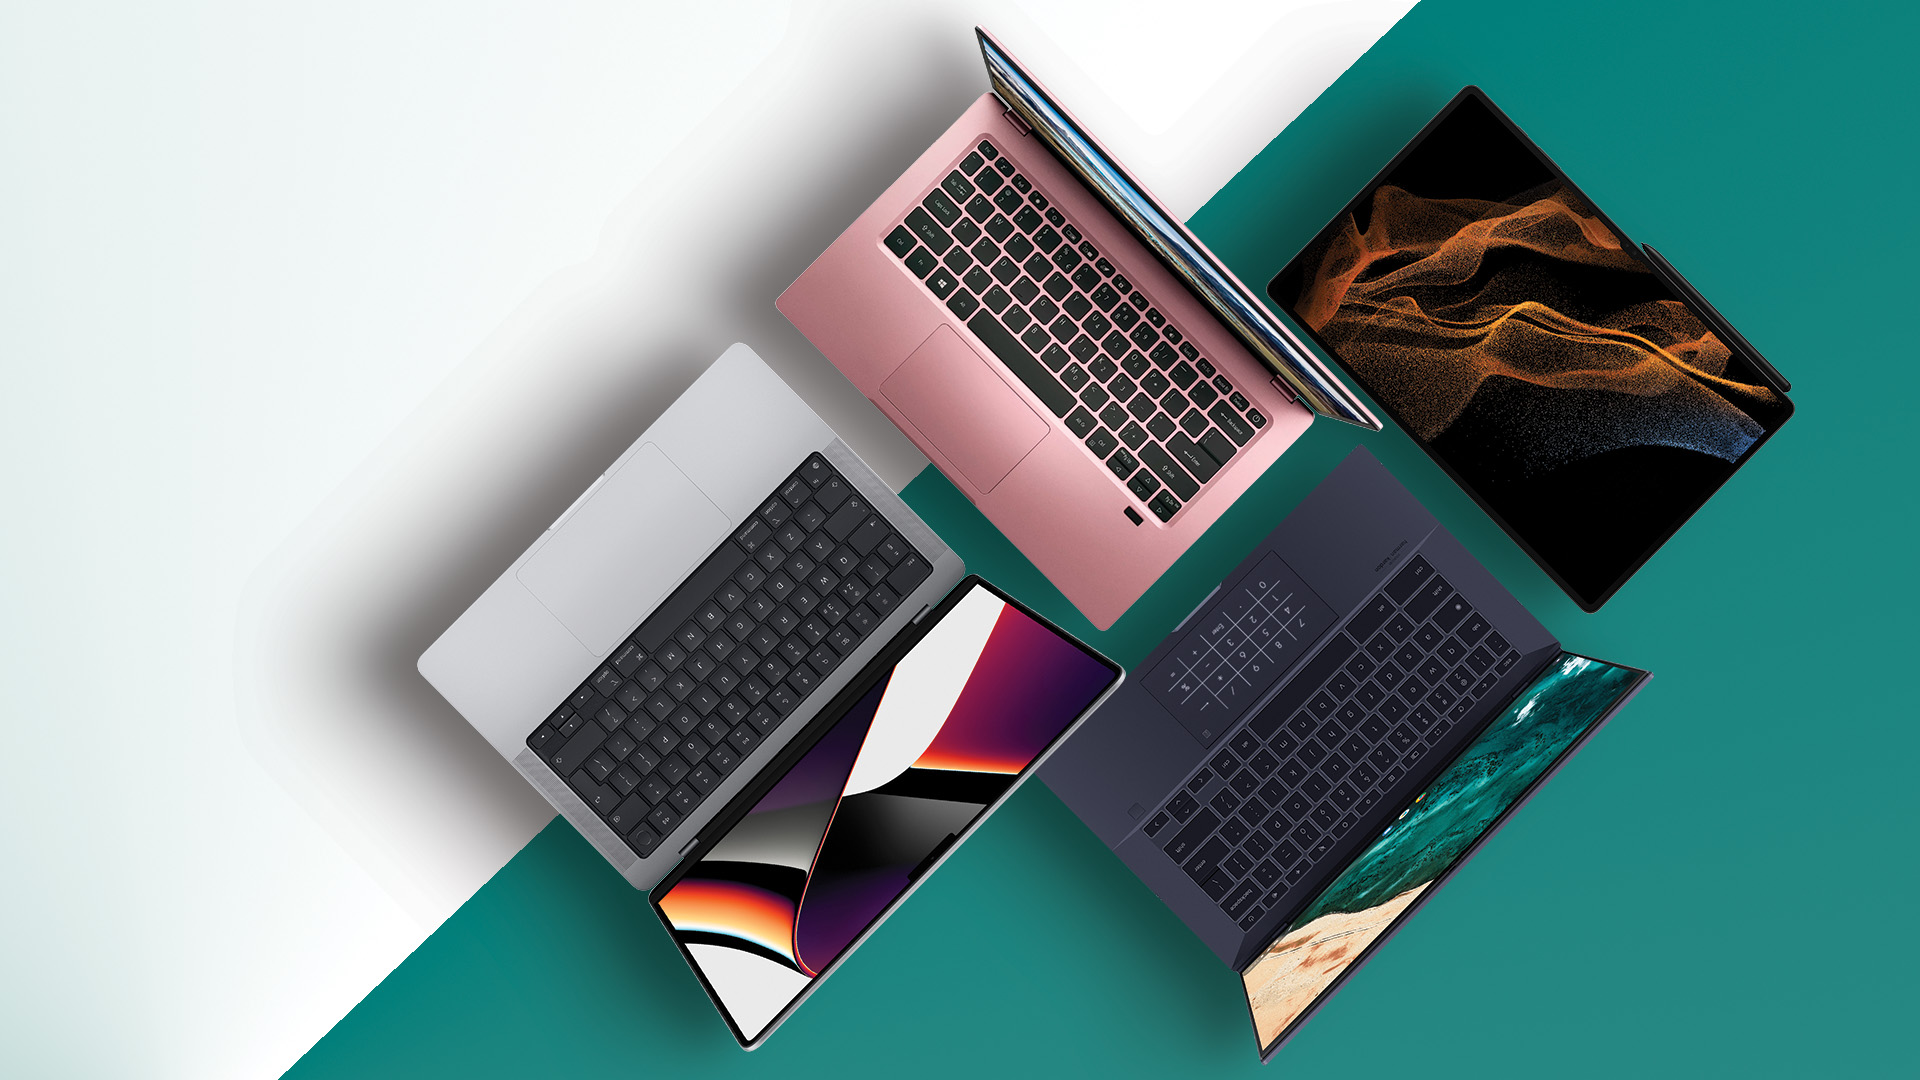 Laptop buying guide: How to choose a laptop to suit you | Stuff